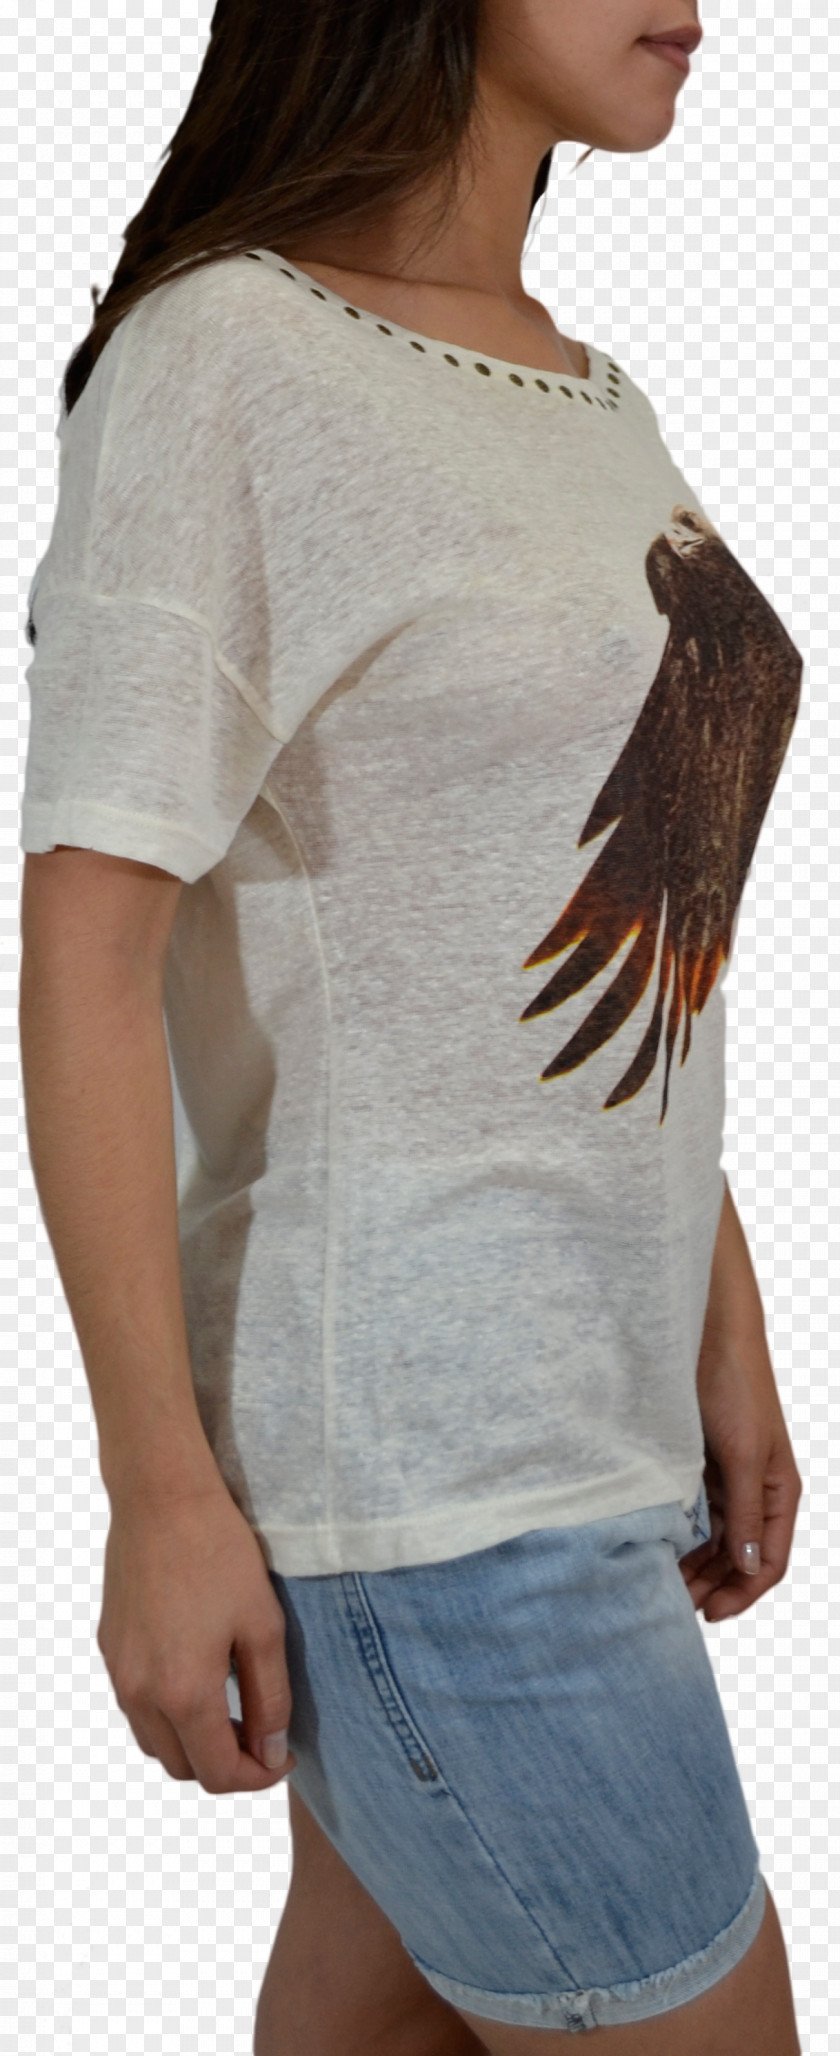 T-shirt Blouse Sleeve Shoulder Flax PNG